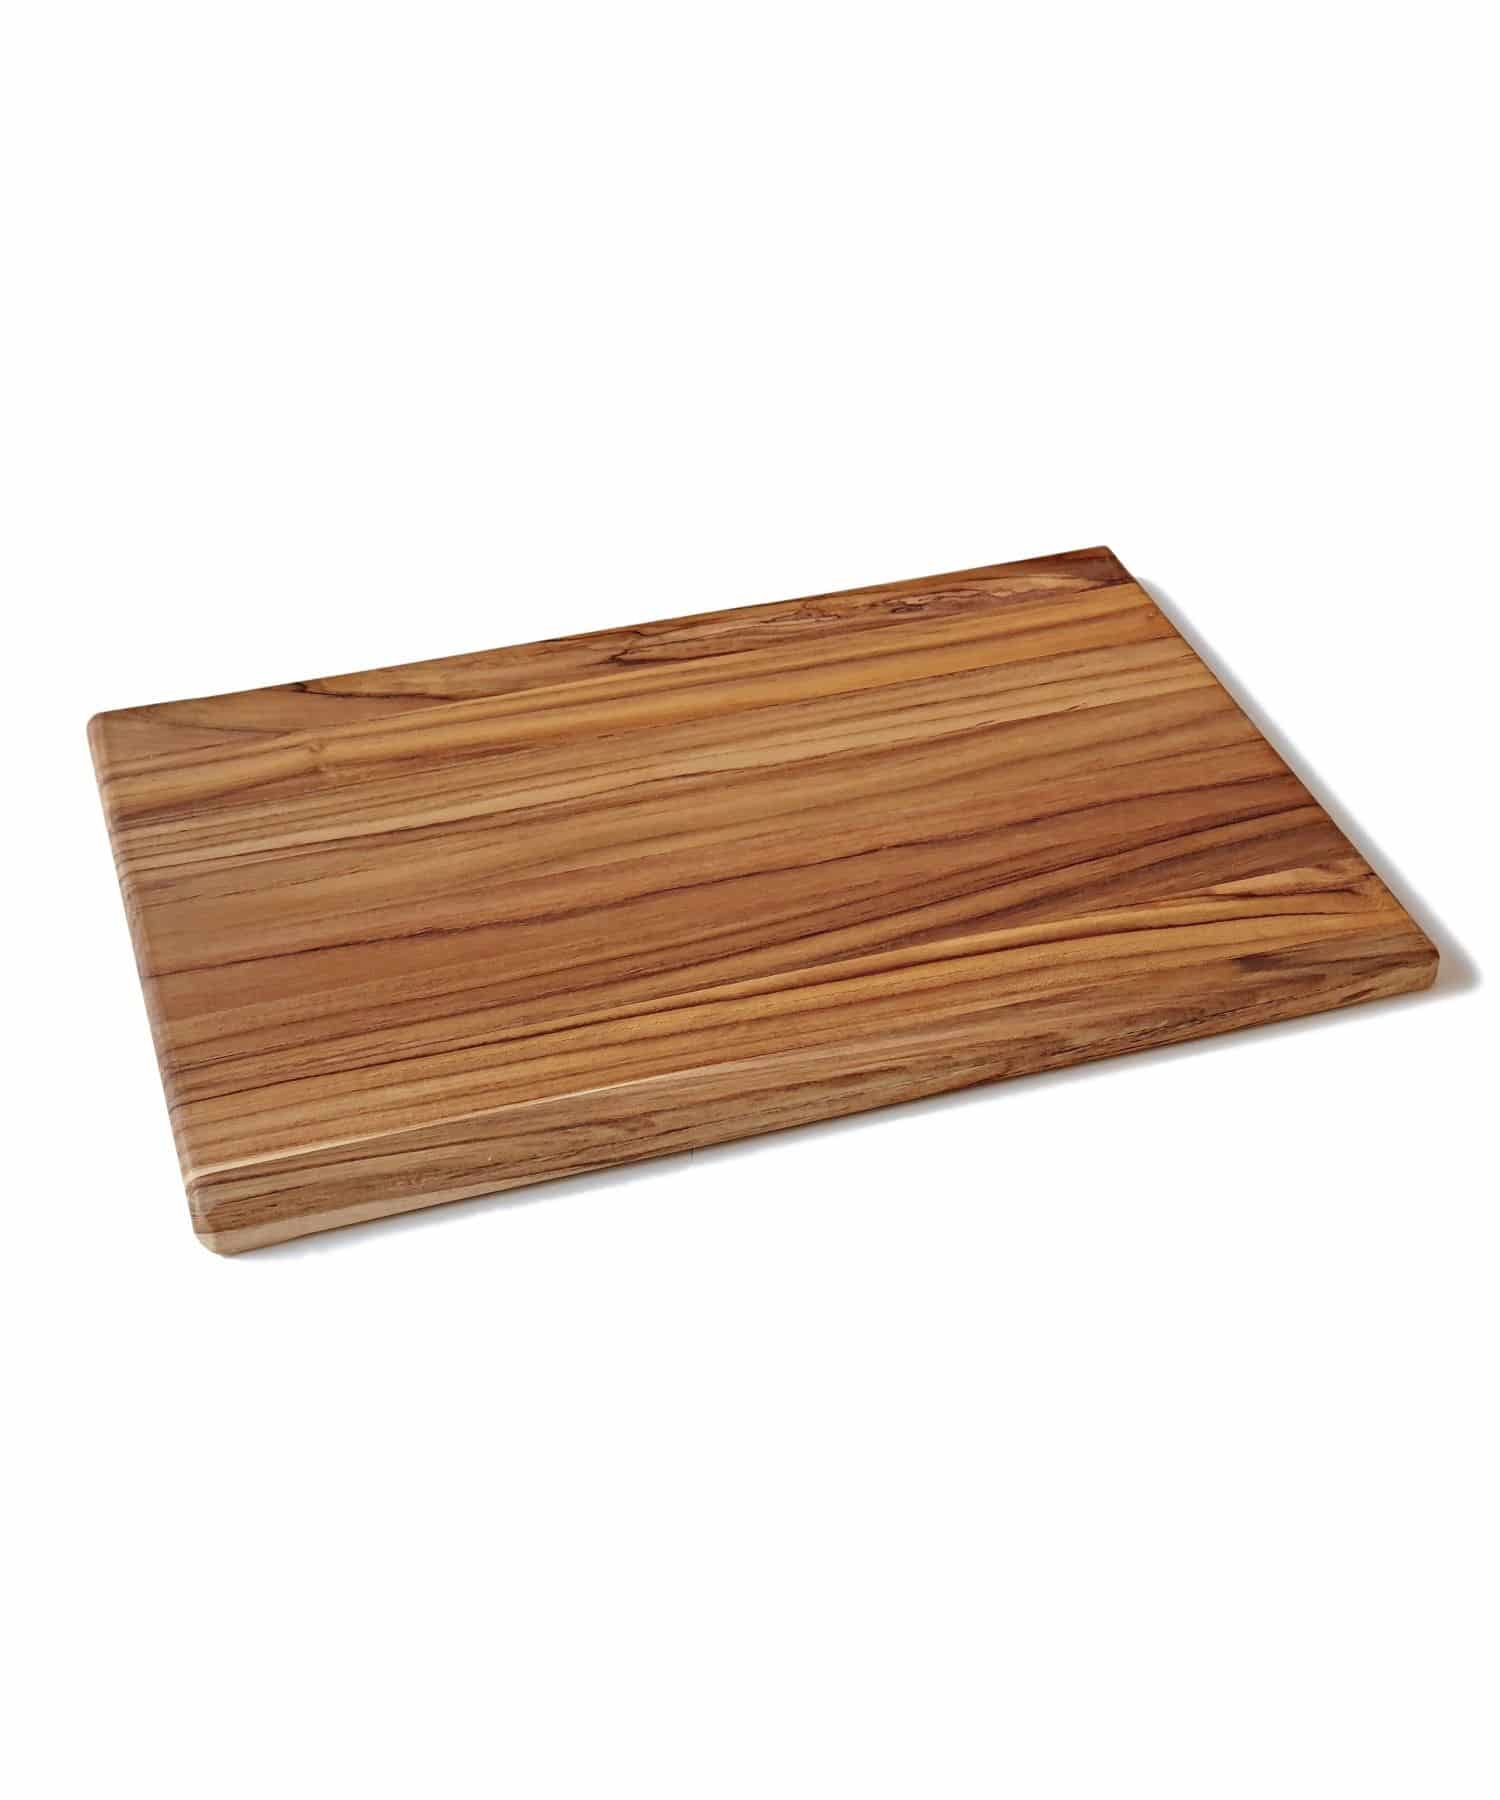 rand Attent Albany Grote snijplank N°105 in teak, BioMaderas, FSC® 100%